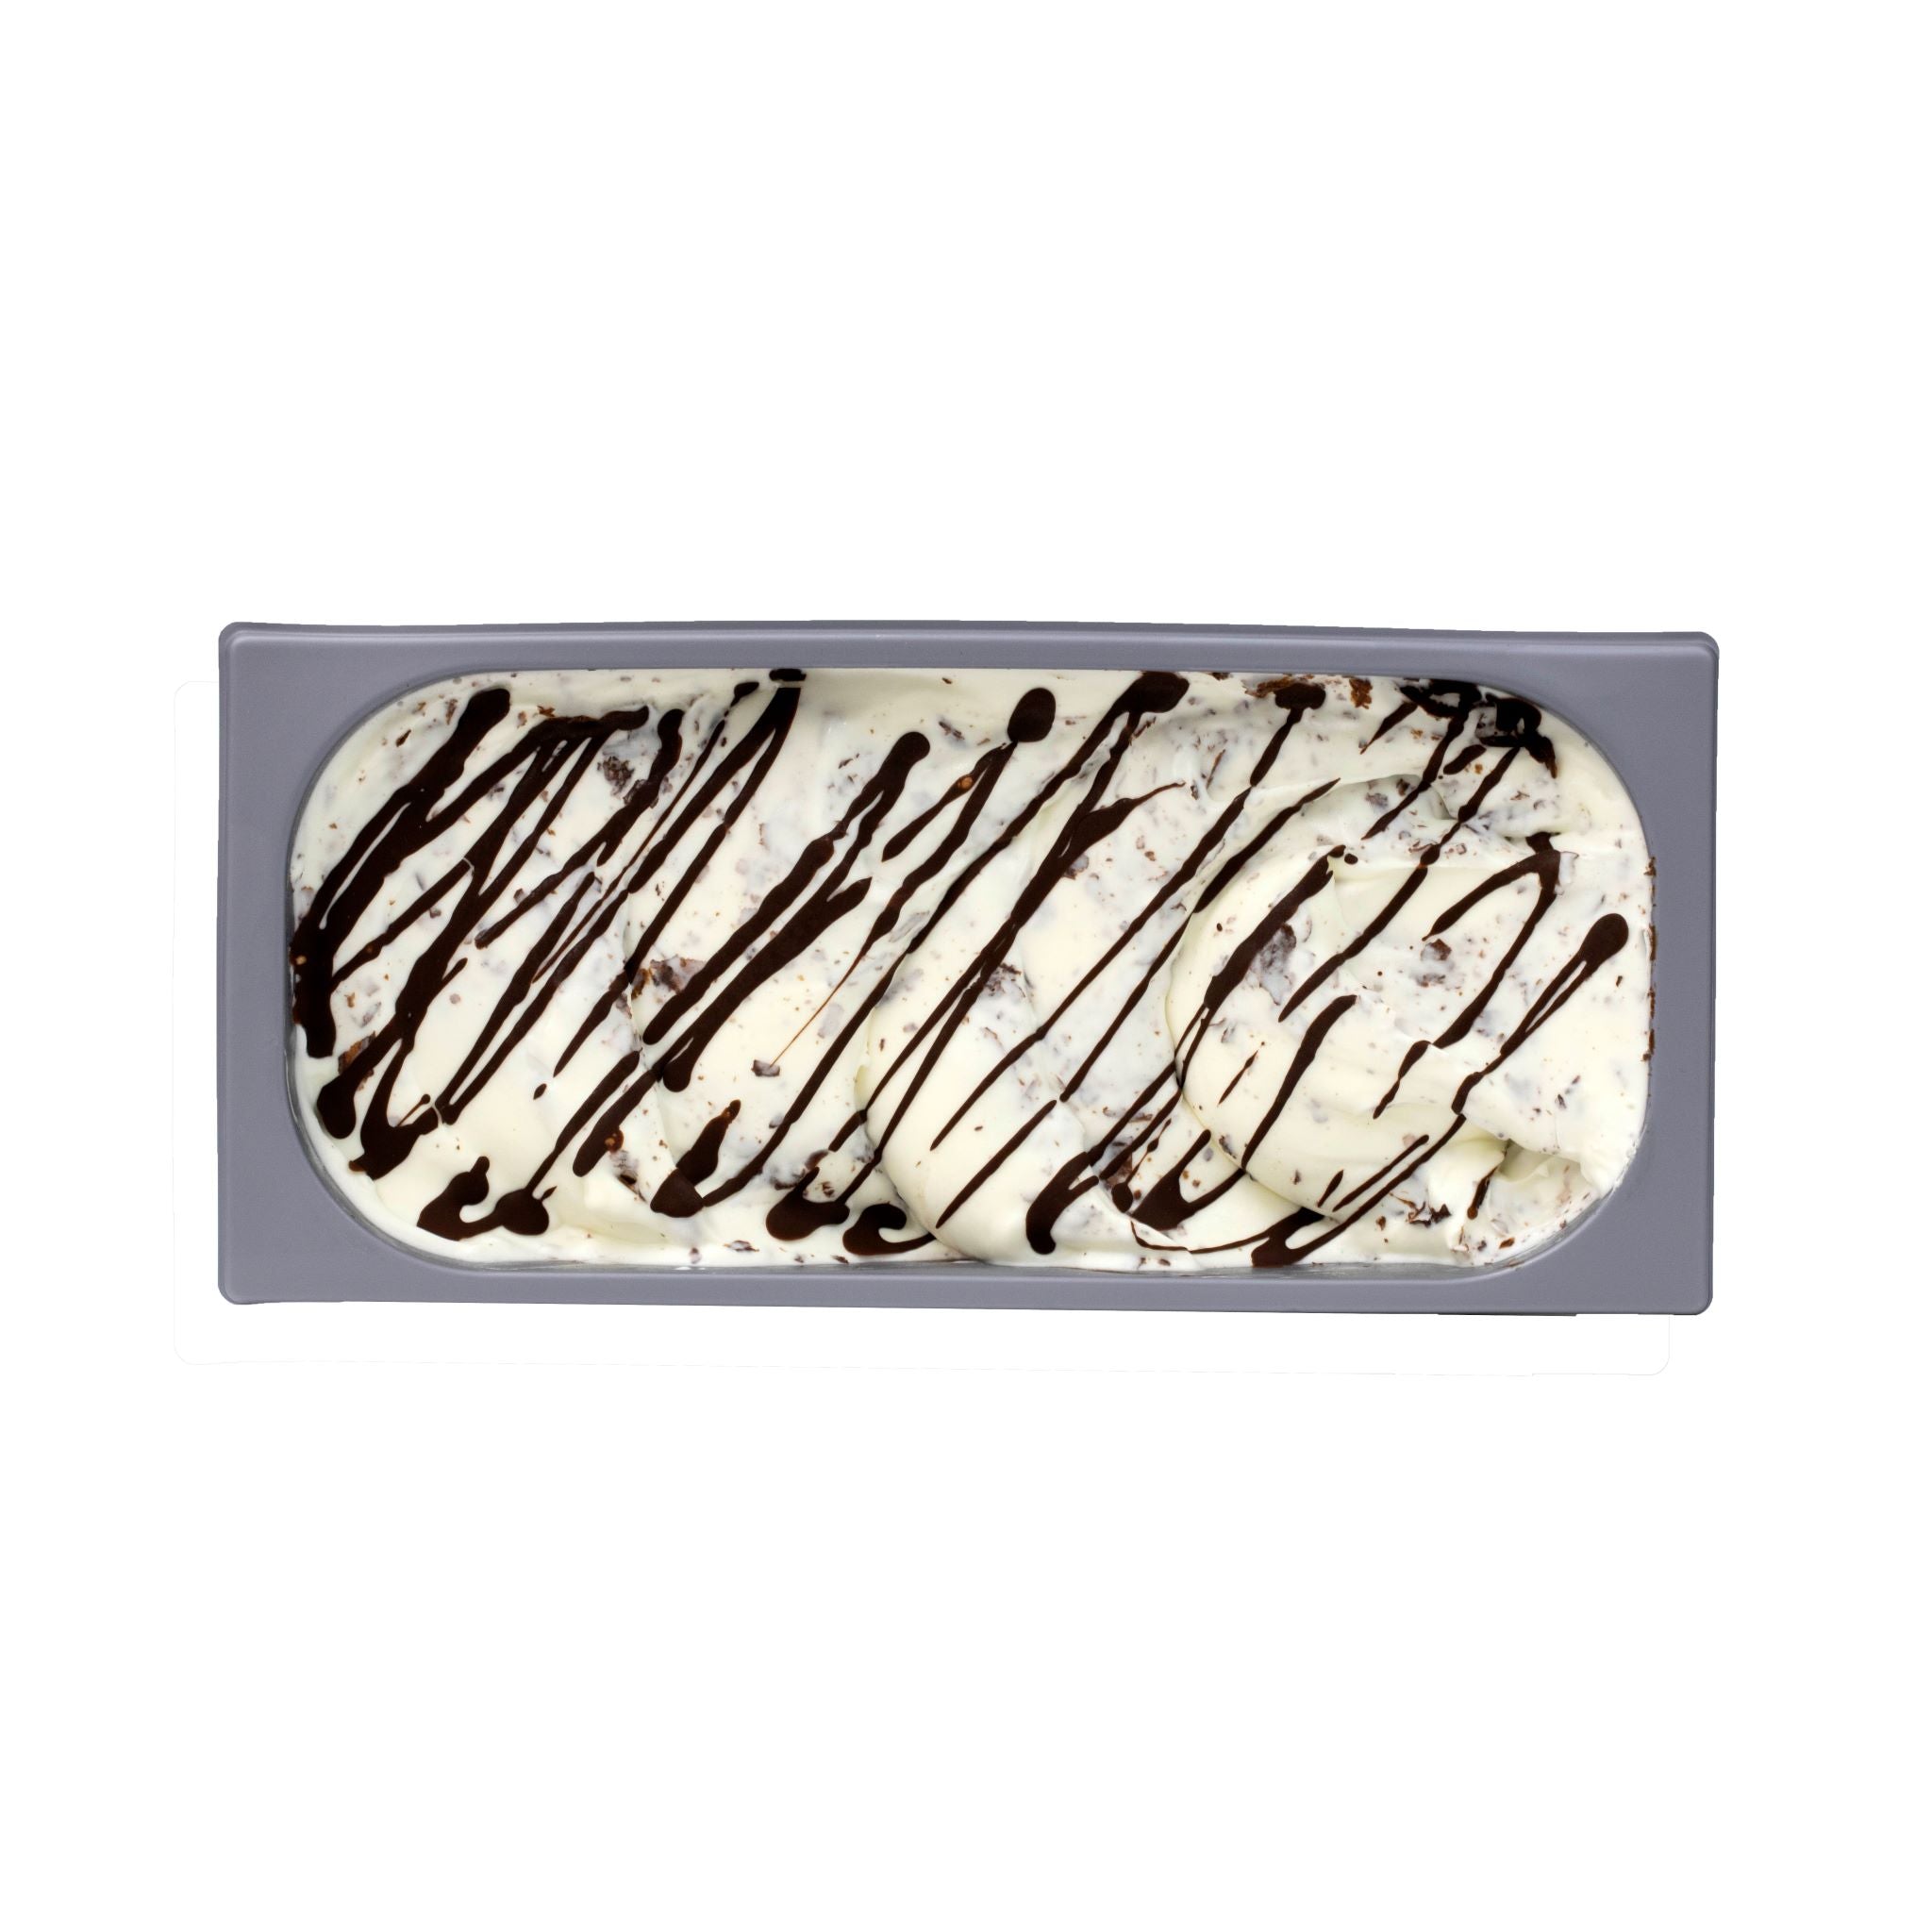 Stracciatella gelato is a classic Italian frozen dessert that is characterized by its smooth, creamy texture and delicate flavor. The gelato is made by blending sweet cream with fine shavings of rich, high-quality chocolate. The chocolate shavings are then carefully folded into the gelato mixture, creating a beautiful, marbled effect.